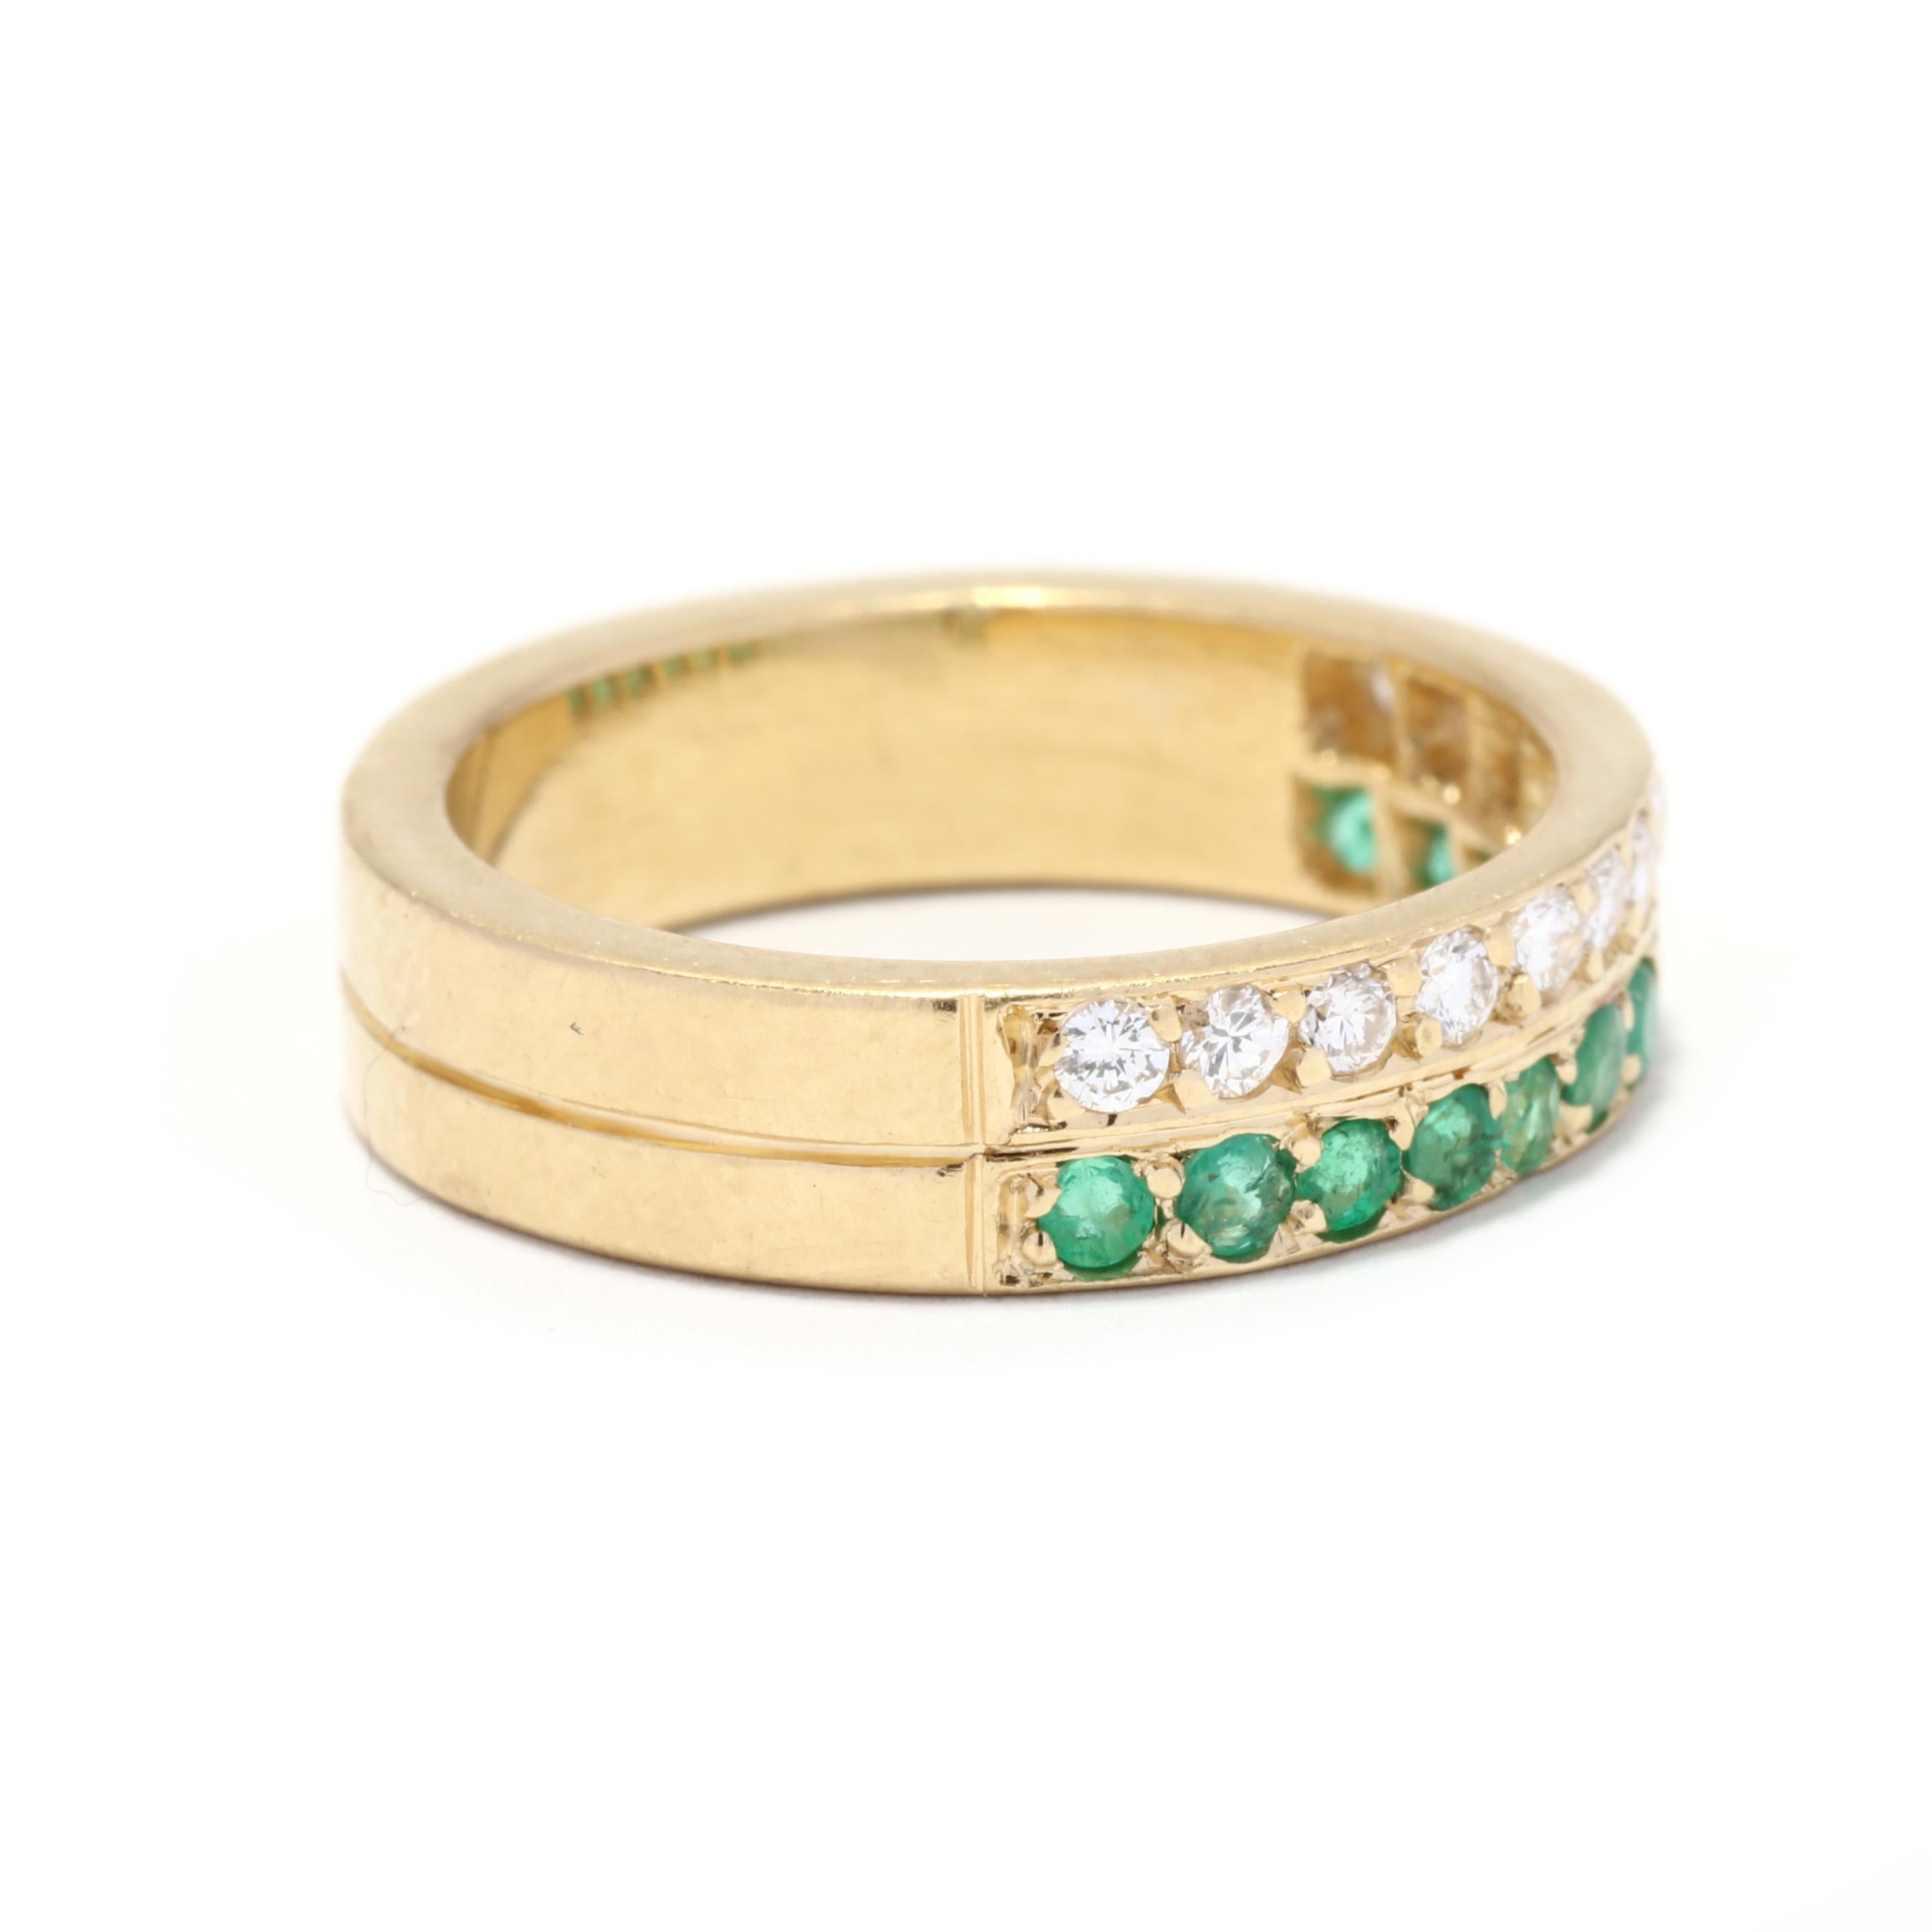 A vintage 18 karat yellow gold diamond and emerald double row band ring. This ring features one row of full cut round diamonds weighing approximately .25 total carats and another row of round cut emeralds weighing approximately .25 total carats and